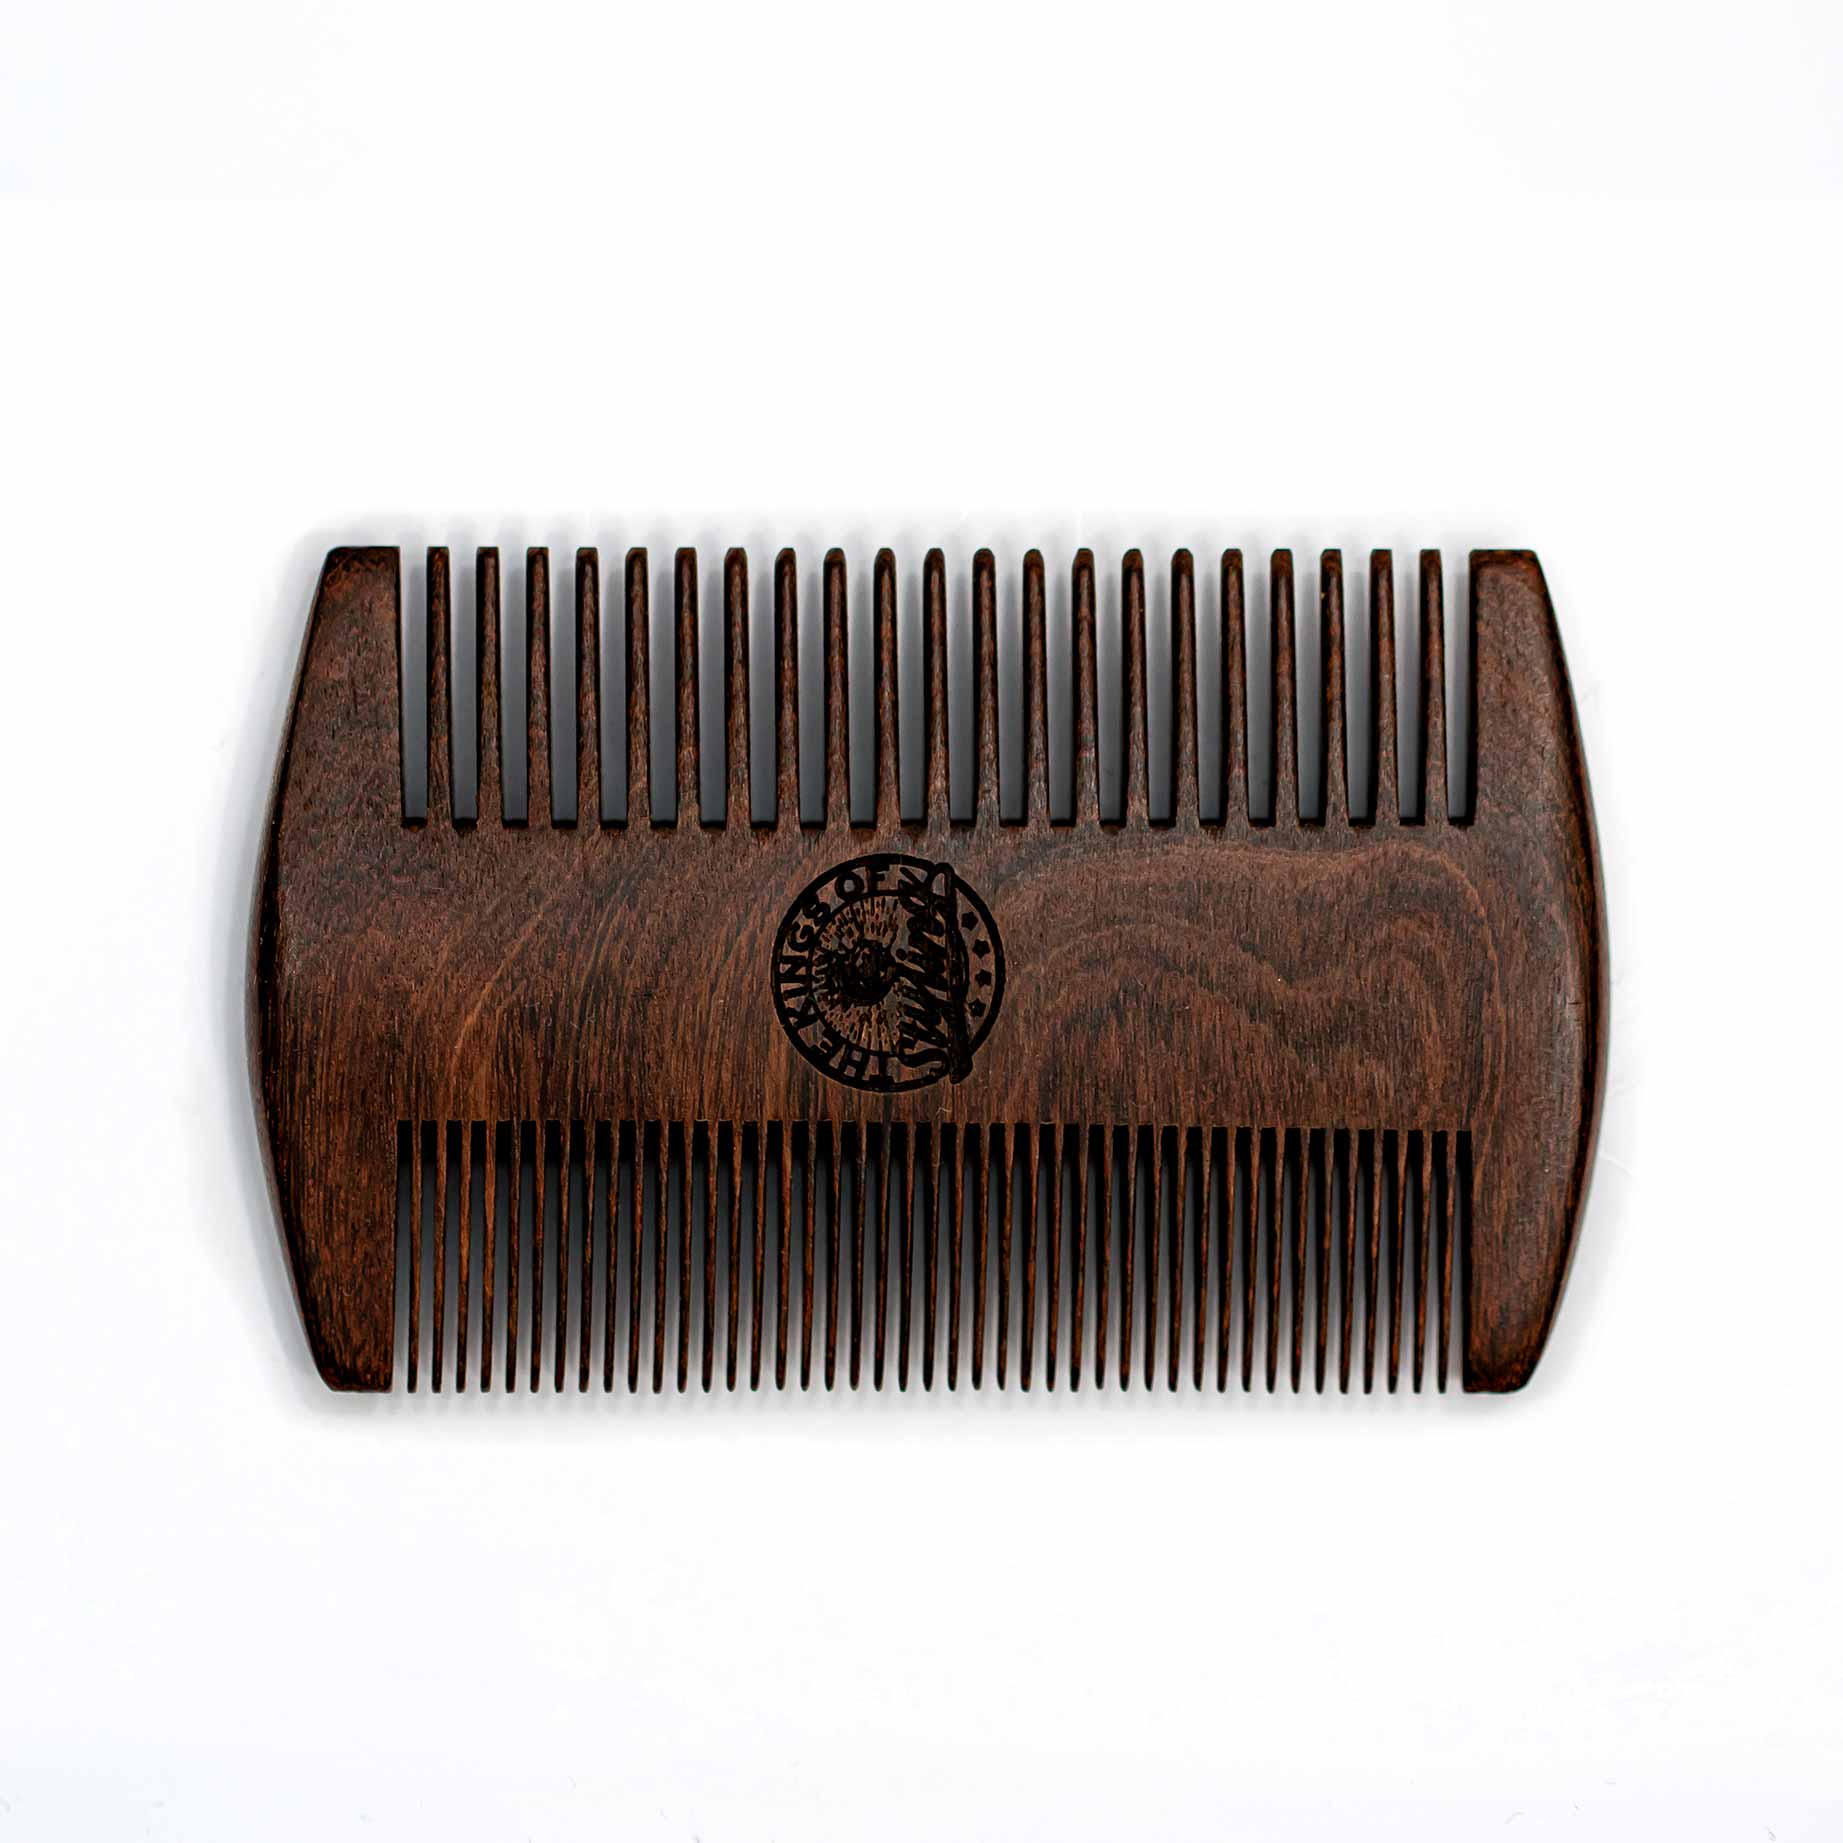 The Kings of Styling - Double Sided Golden Sandalwood Comb